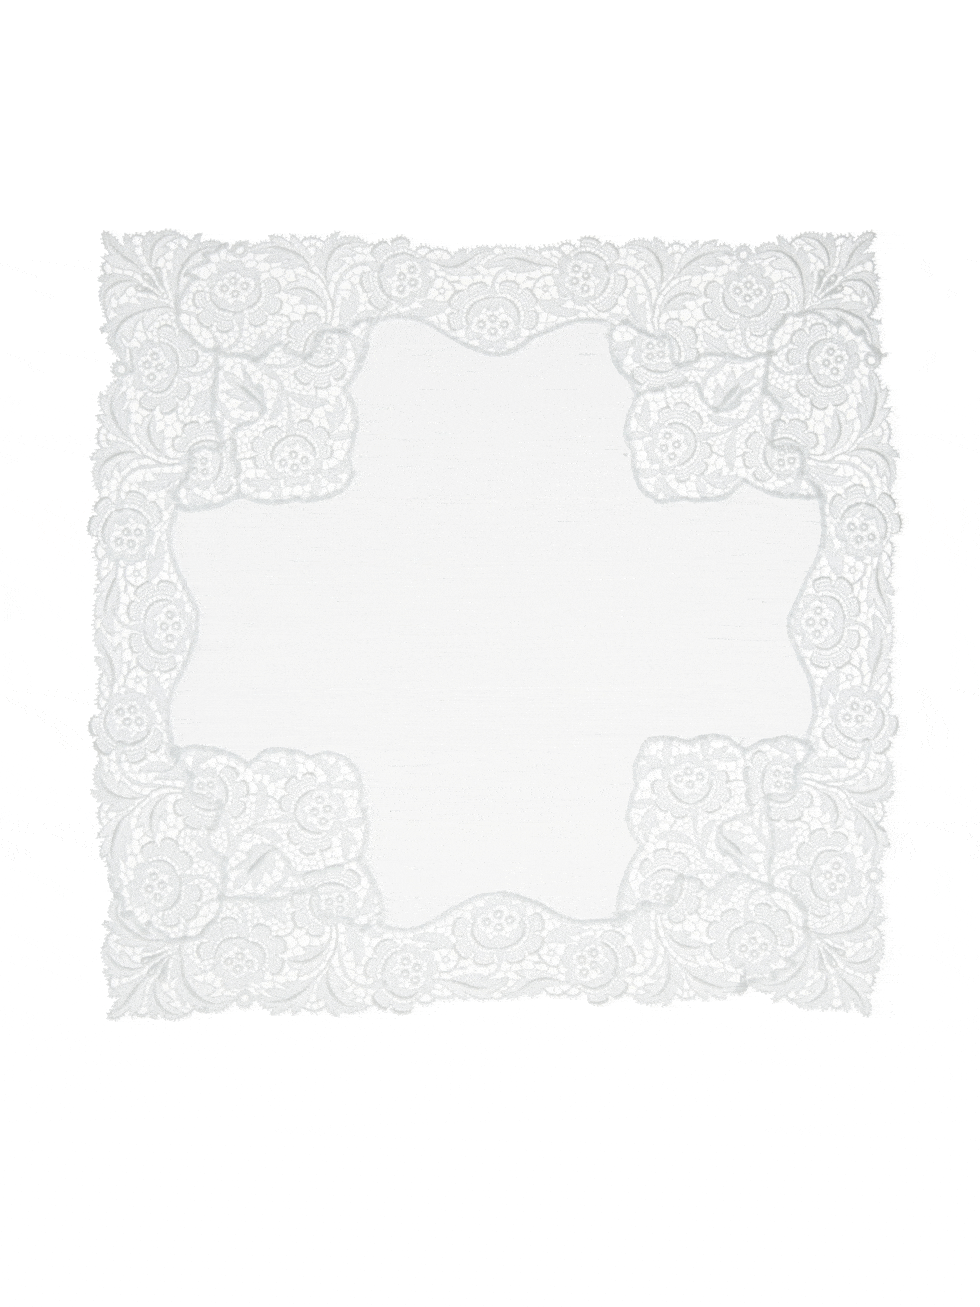 Pattern, White, Grey, Beige, Rectangle, Visual arts, Symmetry, Silver, Square, 